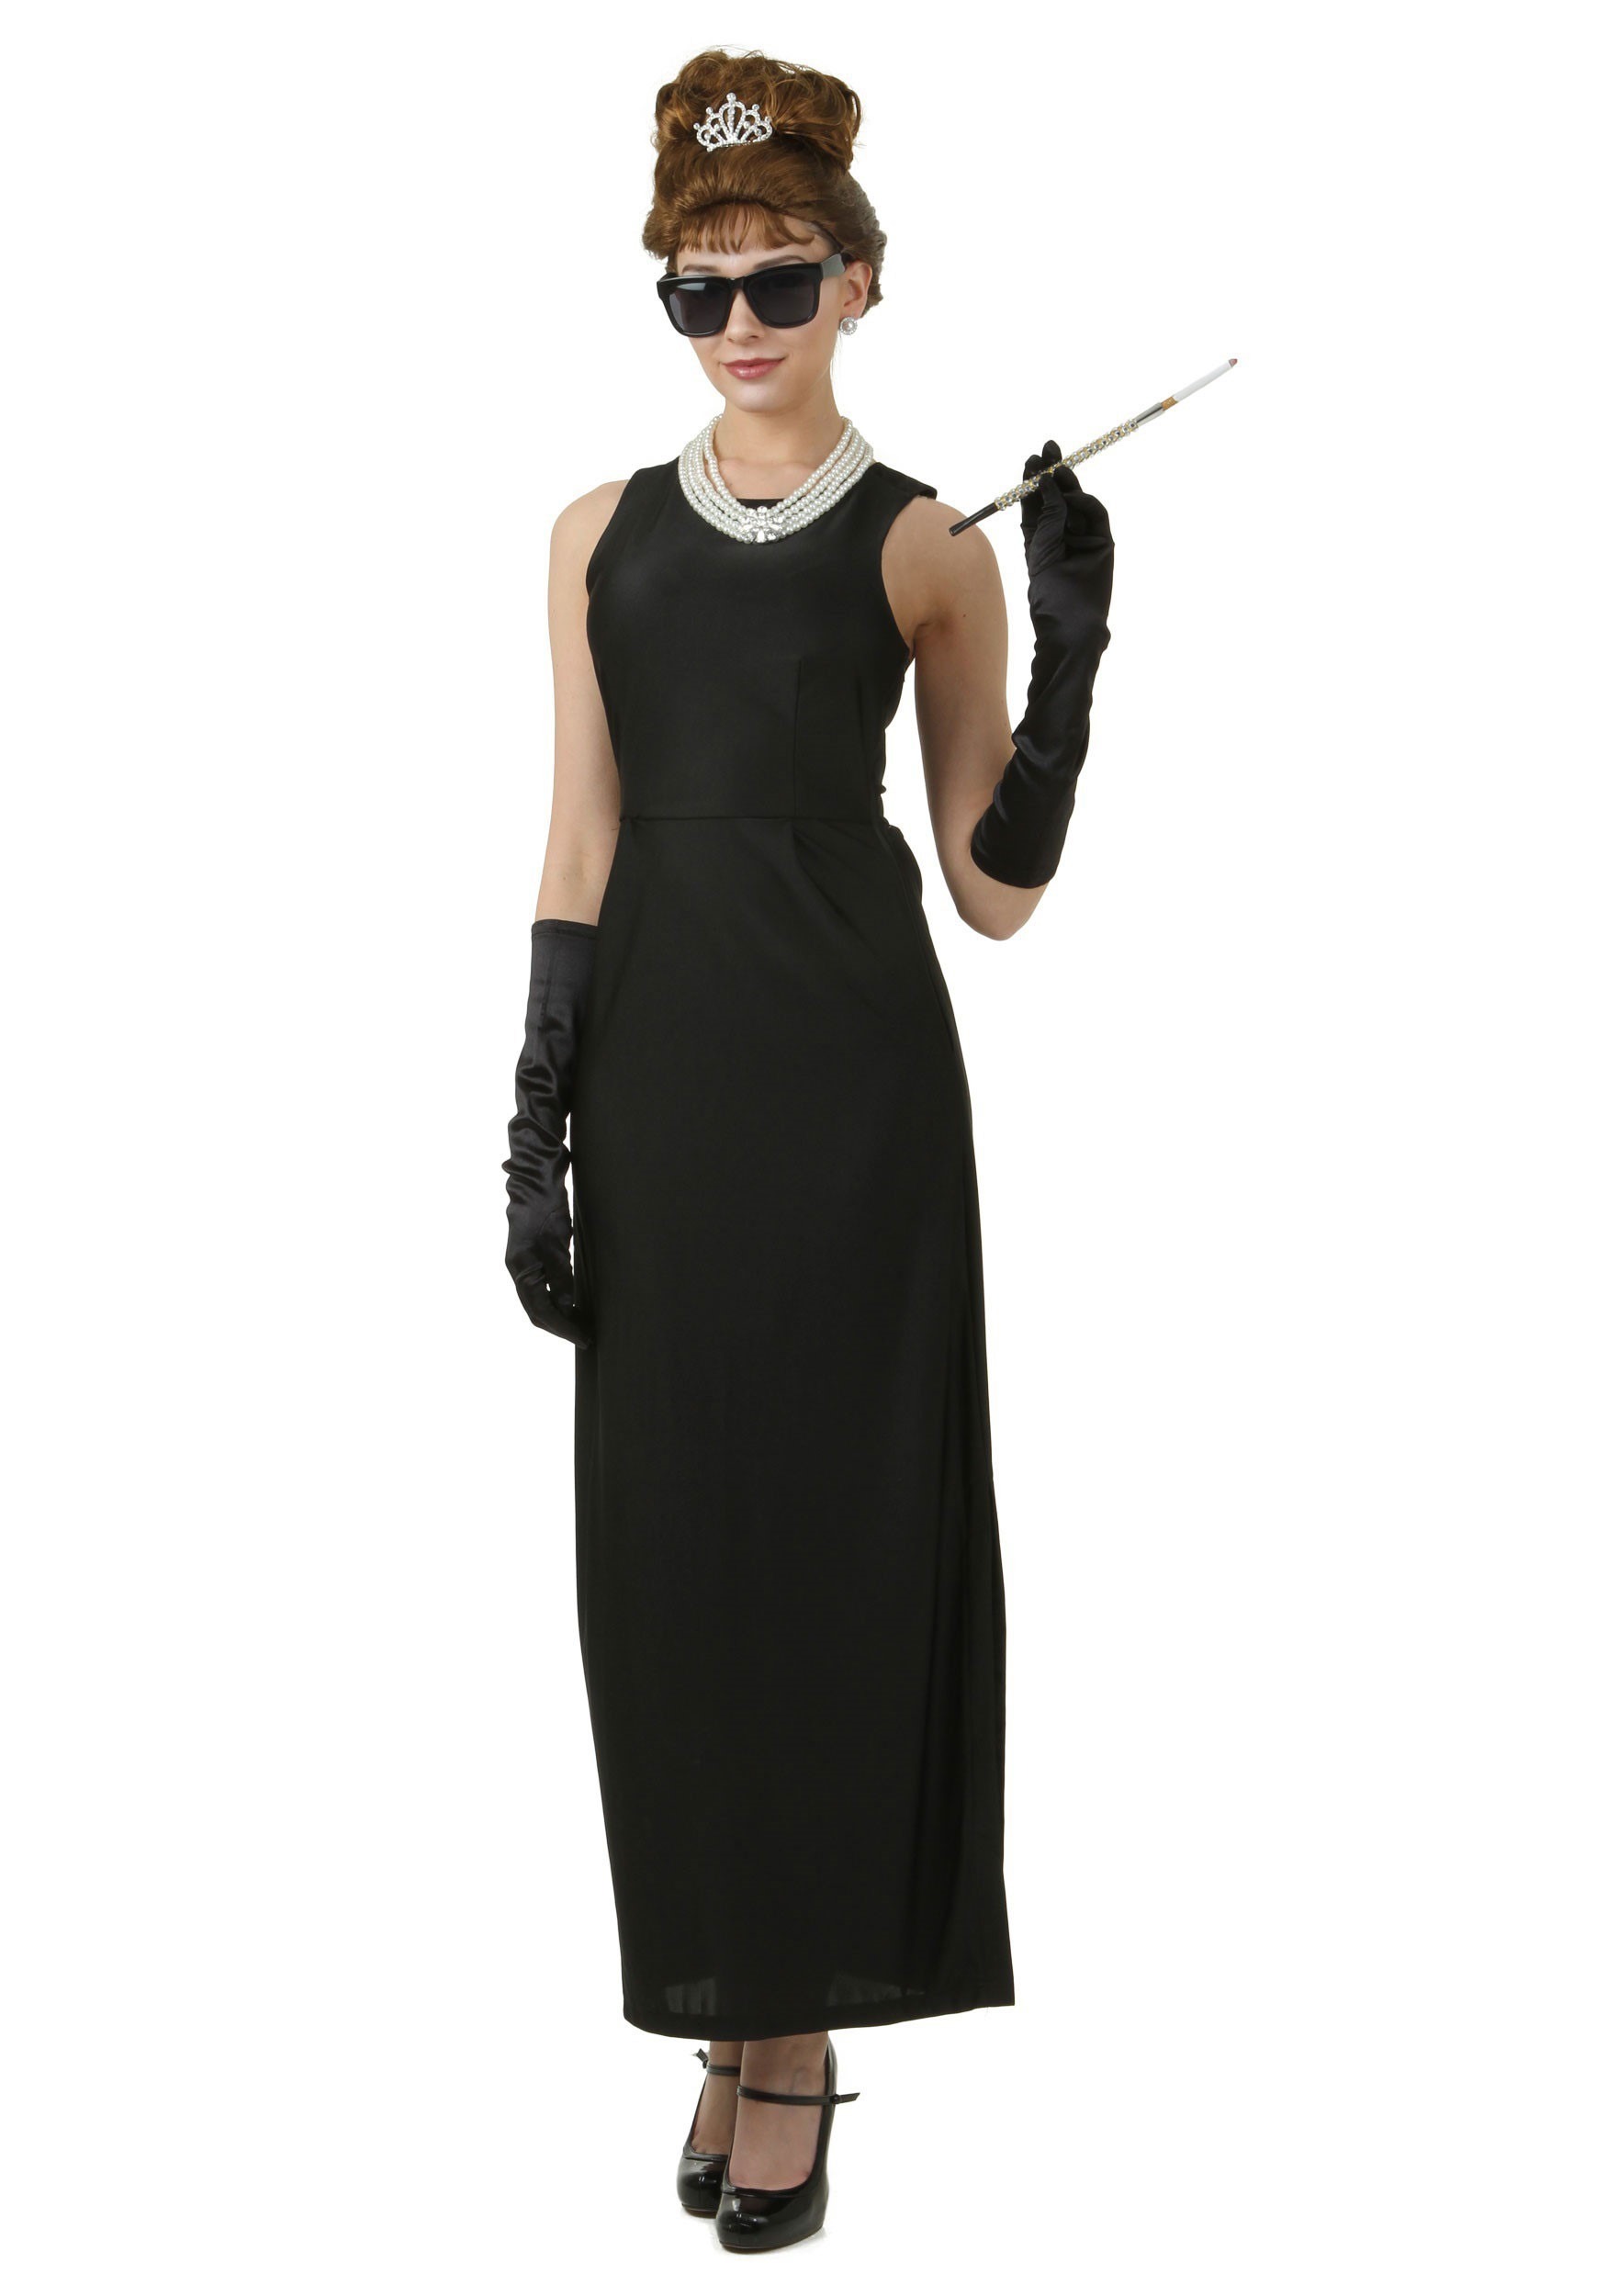 Women's Plus Size Breakfast At Tiffany's Holly Golightly Costume